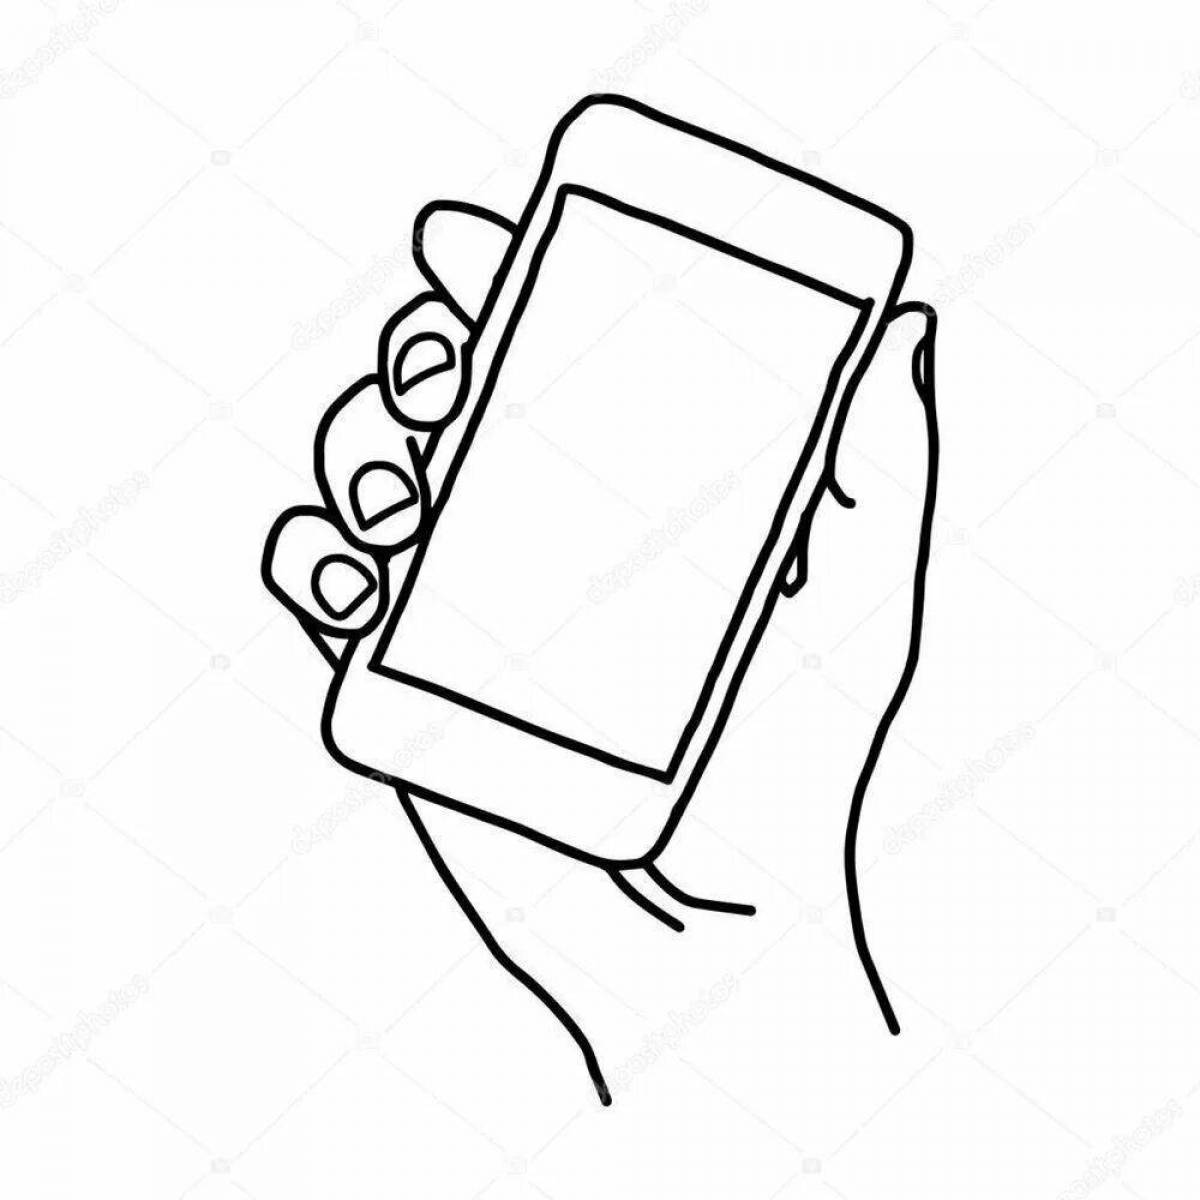 Bright phone coloring book with finger